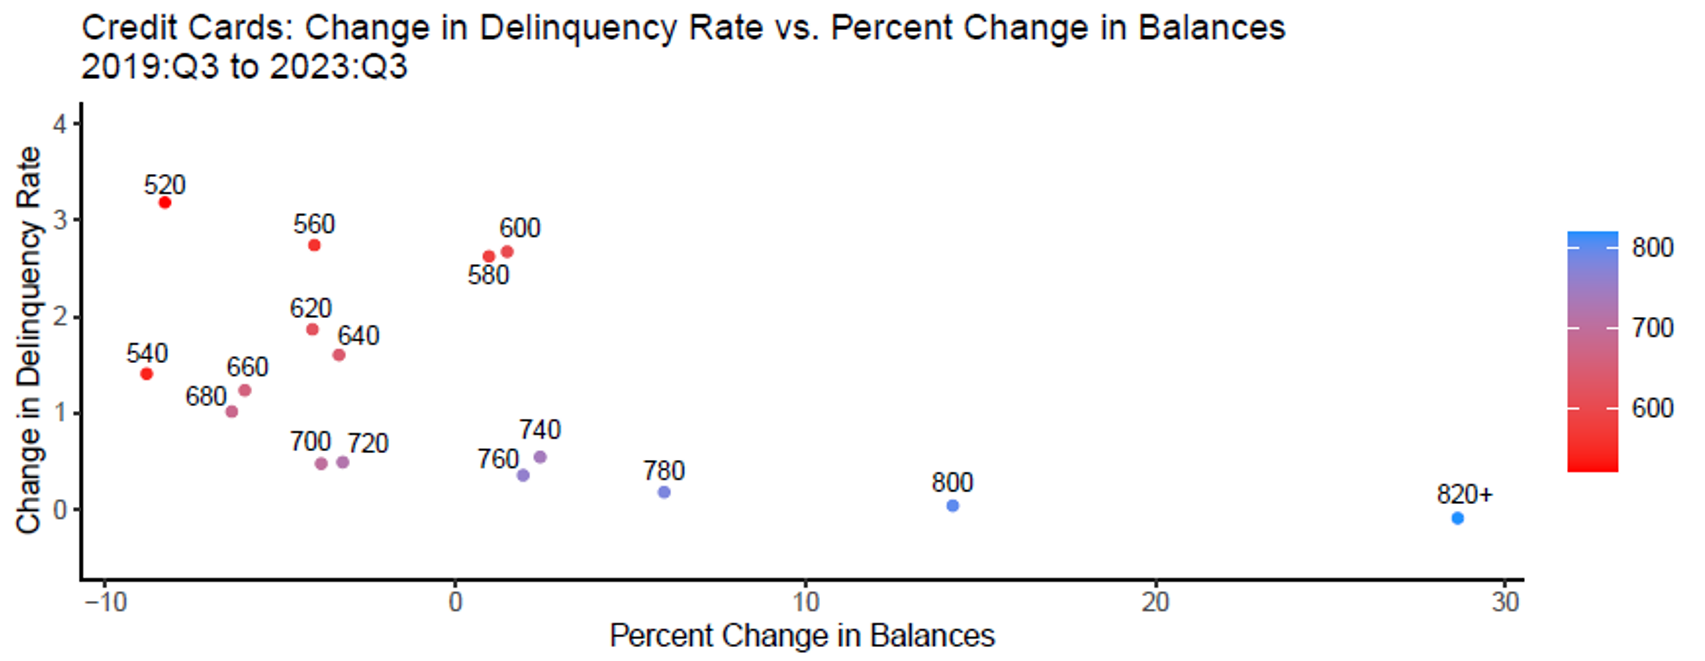 Figure 3. Delinquency rates rose over the pandemic the most for lower-rated borrowers, who also have seen their balances decrease. See accessible link for data.